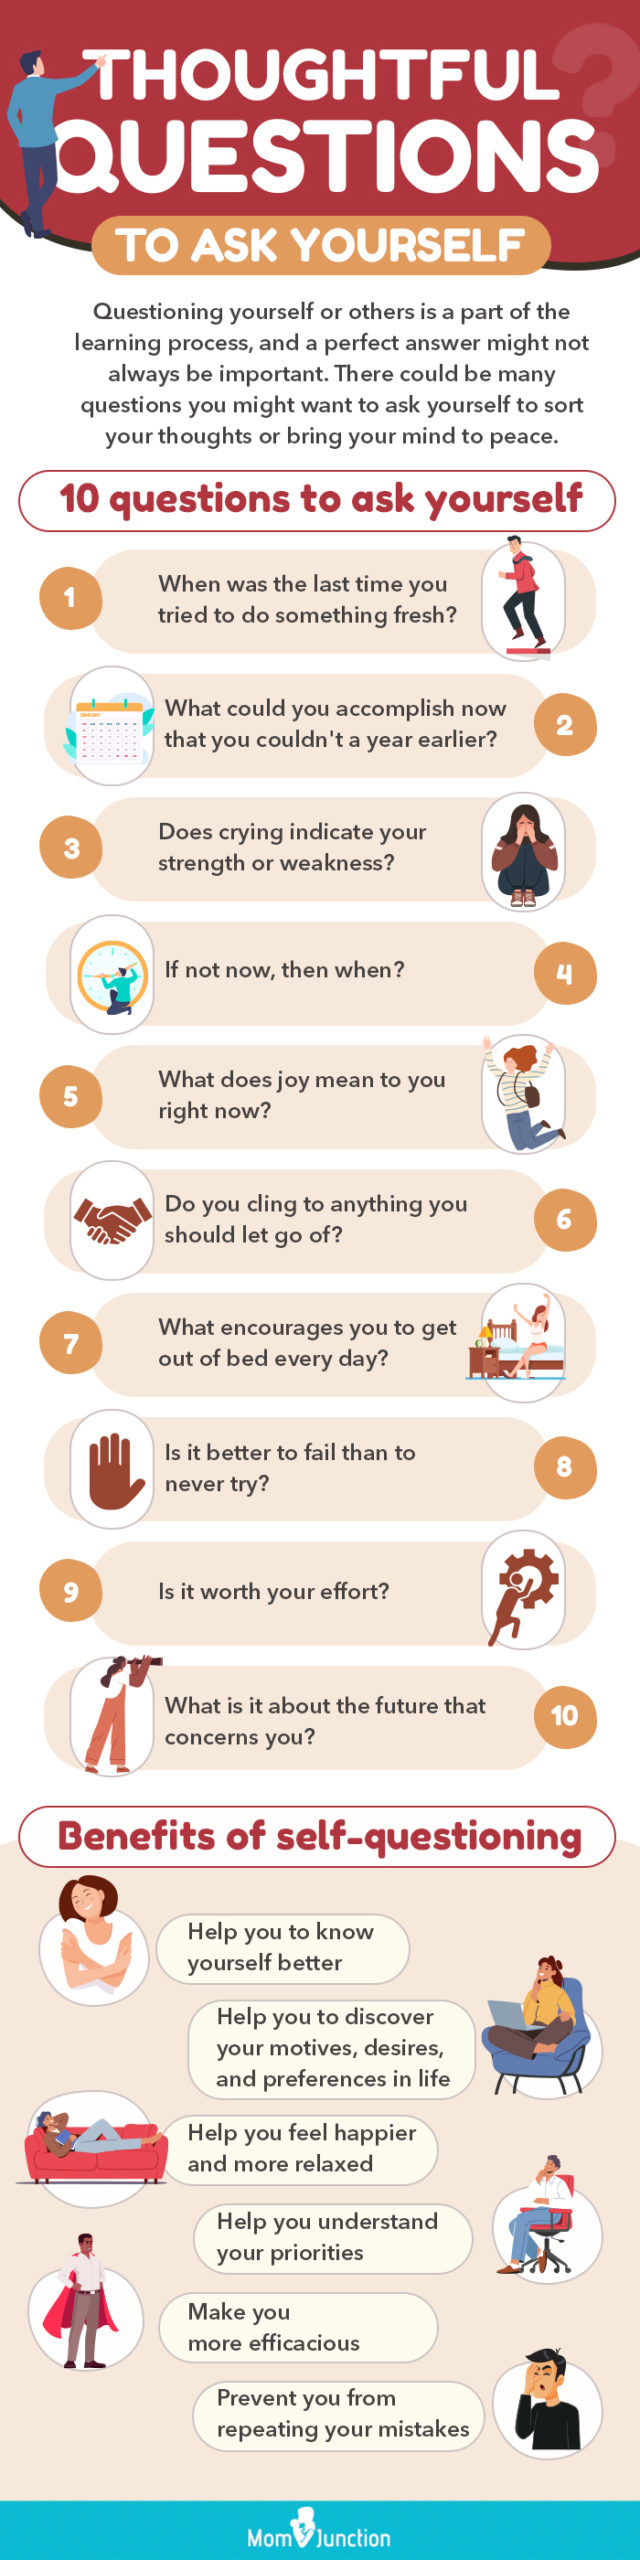 thoughtful questions to ask yourself [infographic]